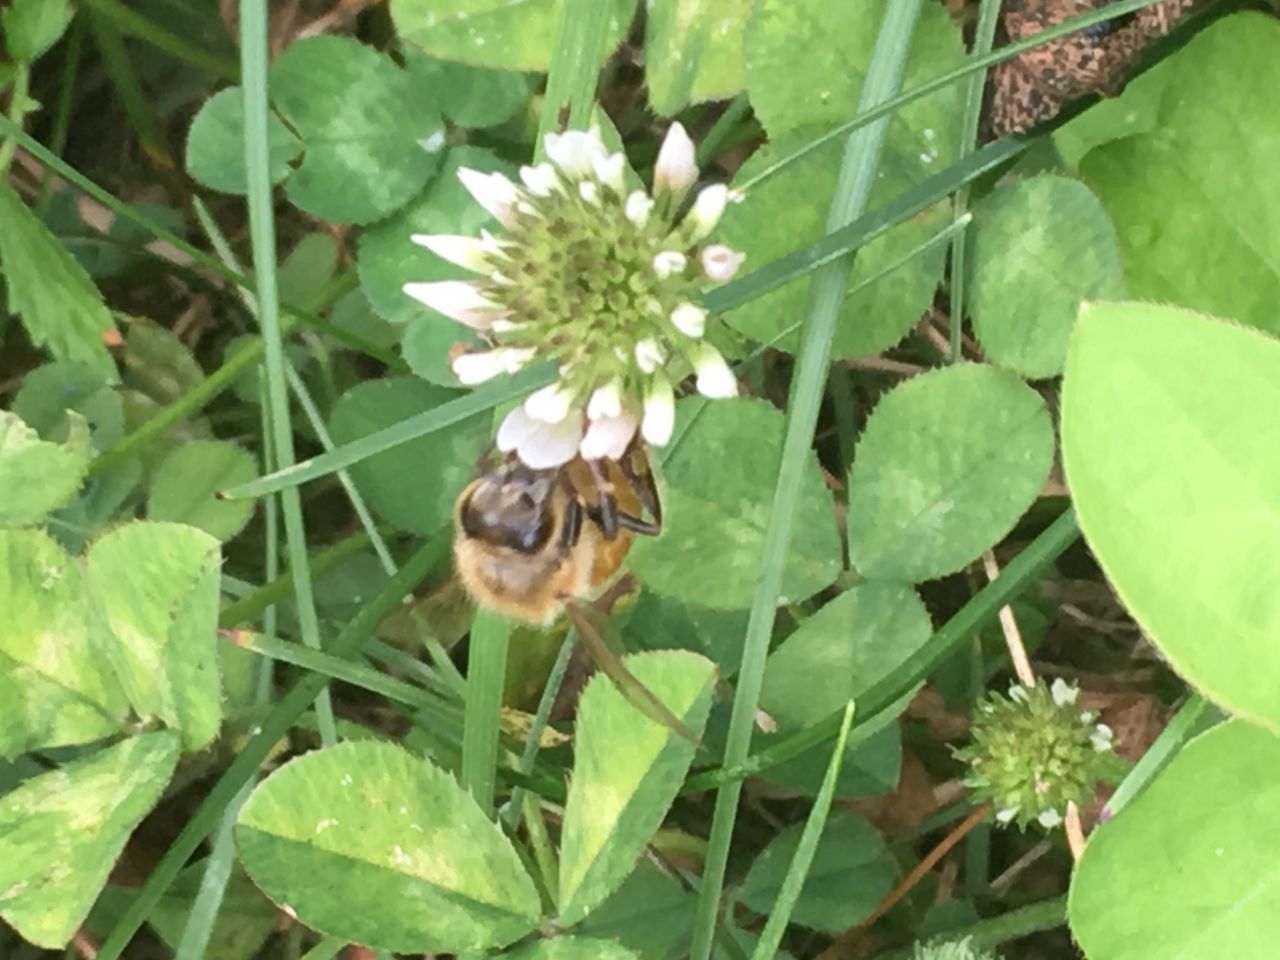 CLOSE-UP OF HONEY BEE ON GREEN FLOWER